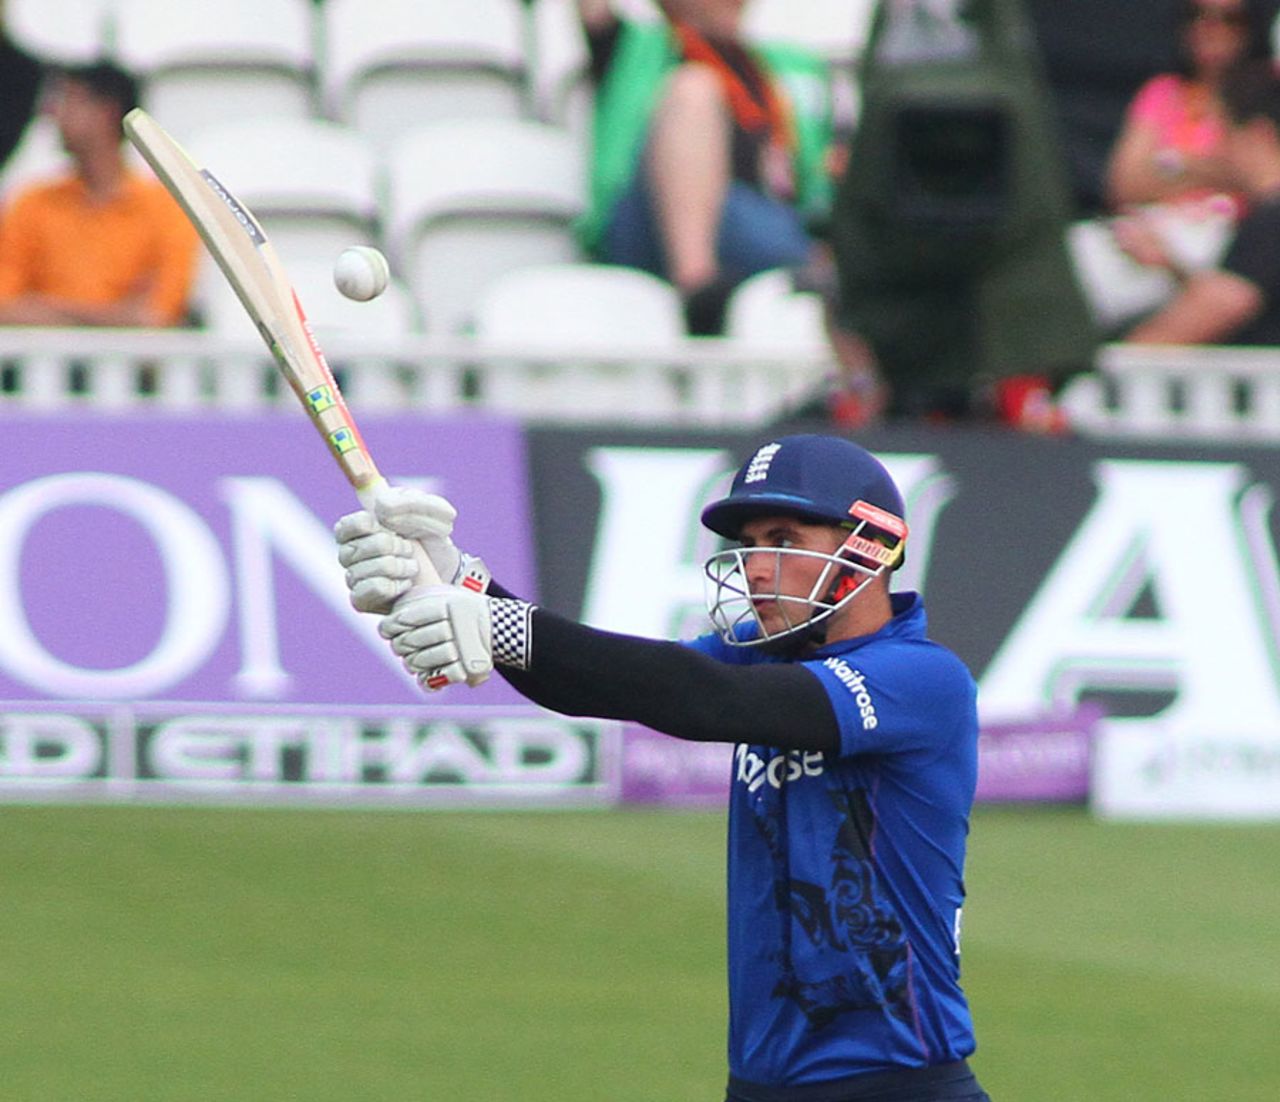 One of Alex Hales' six fours came off the back of his bat, England v New Zealand, 2nd ODI, Kia Oval, June 12, 2015